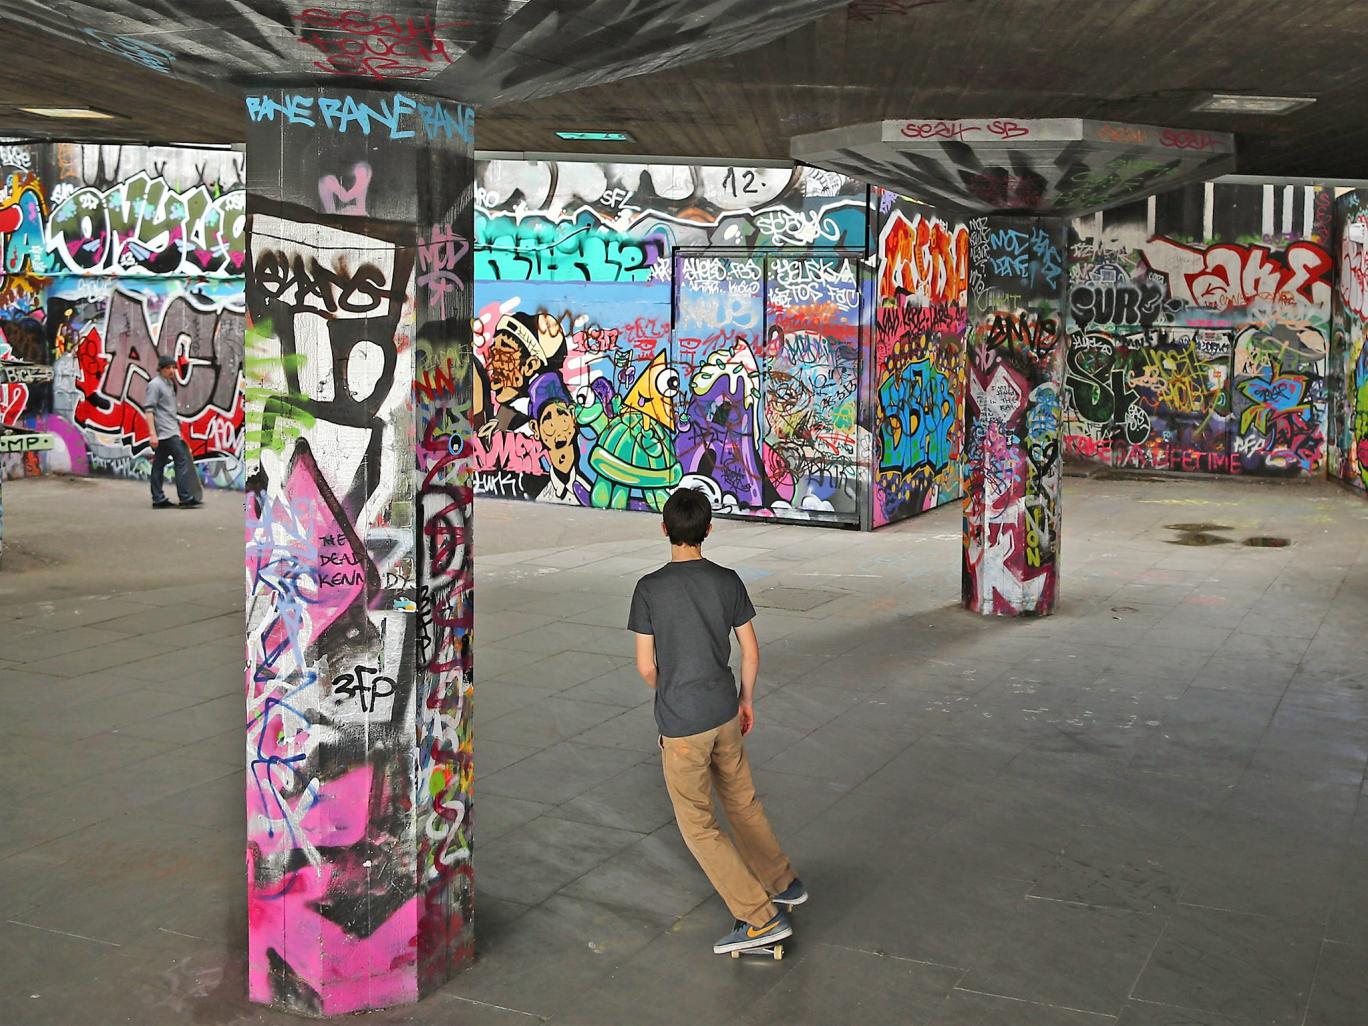 The Long Live South Bank campaign has garnered 58,000 signatures for a petition calling for the skate park